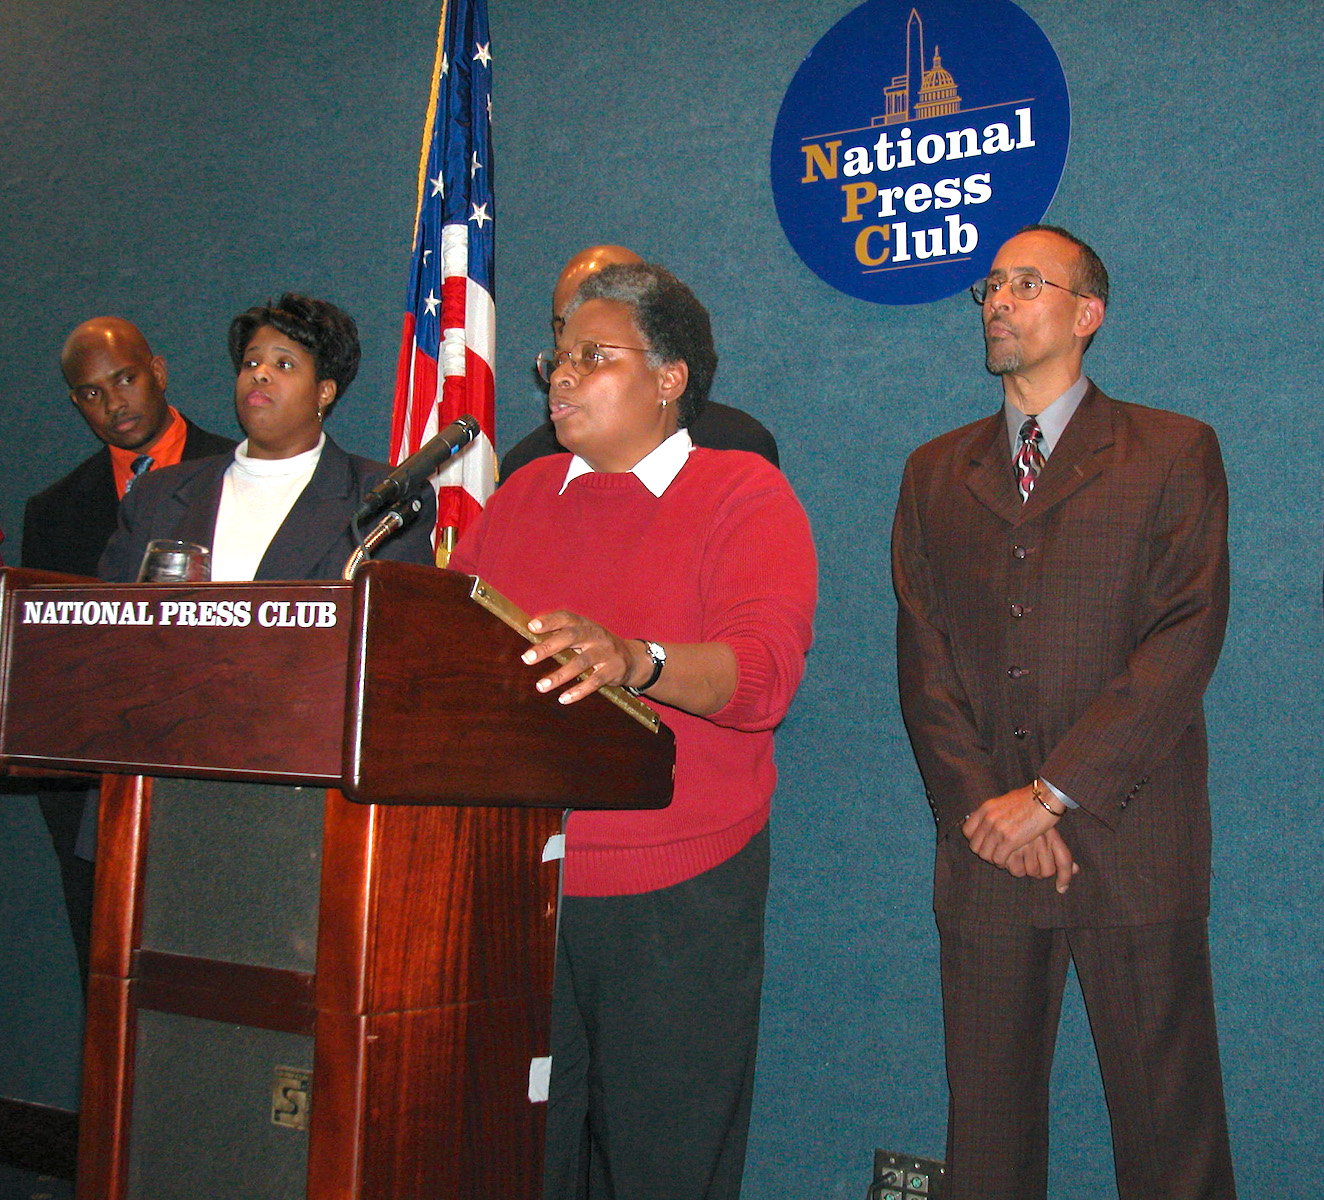 Mandy announcing the National Black Justice Coalition’s support of marriage equality at the NBJC Press event at National Press Club, 2003, Washington, DC. Donna Payne and three men are pictured in the background. Photo courtesy of Mandy Carter.